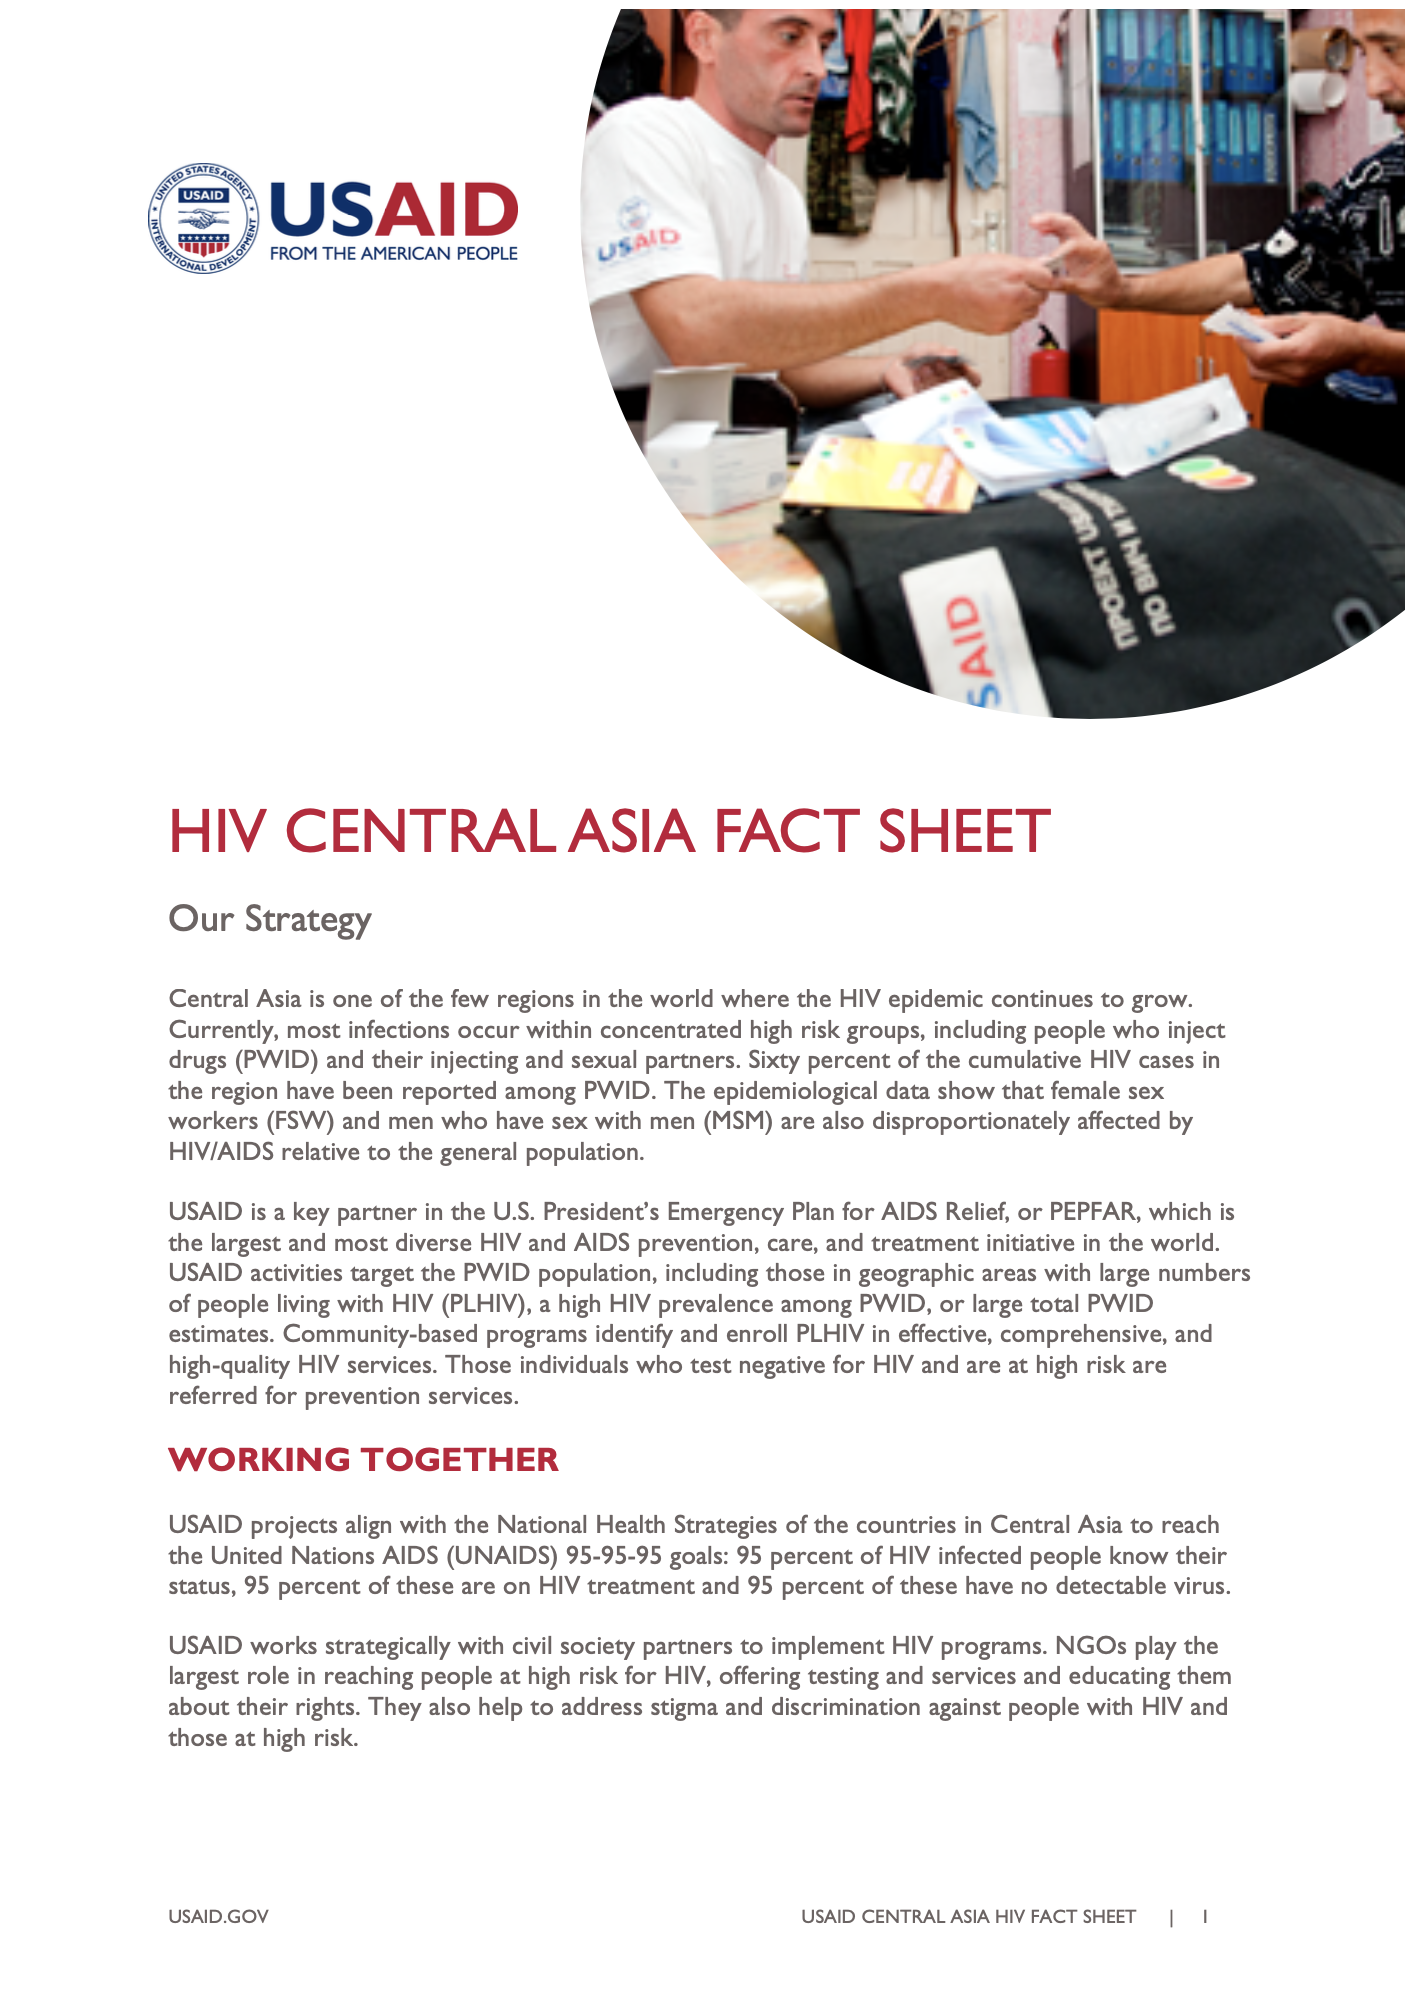 HIV Central Asia Fact Sheet